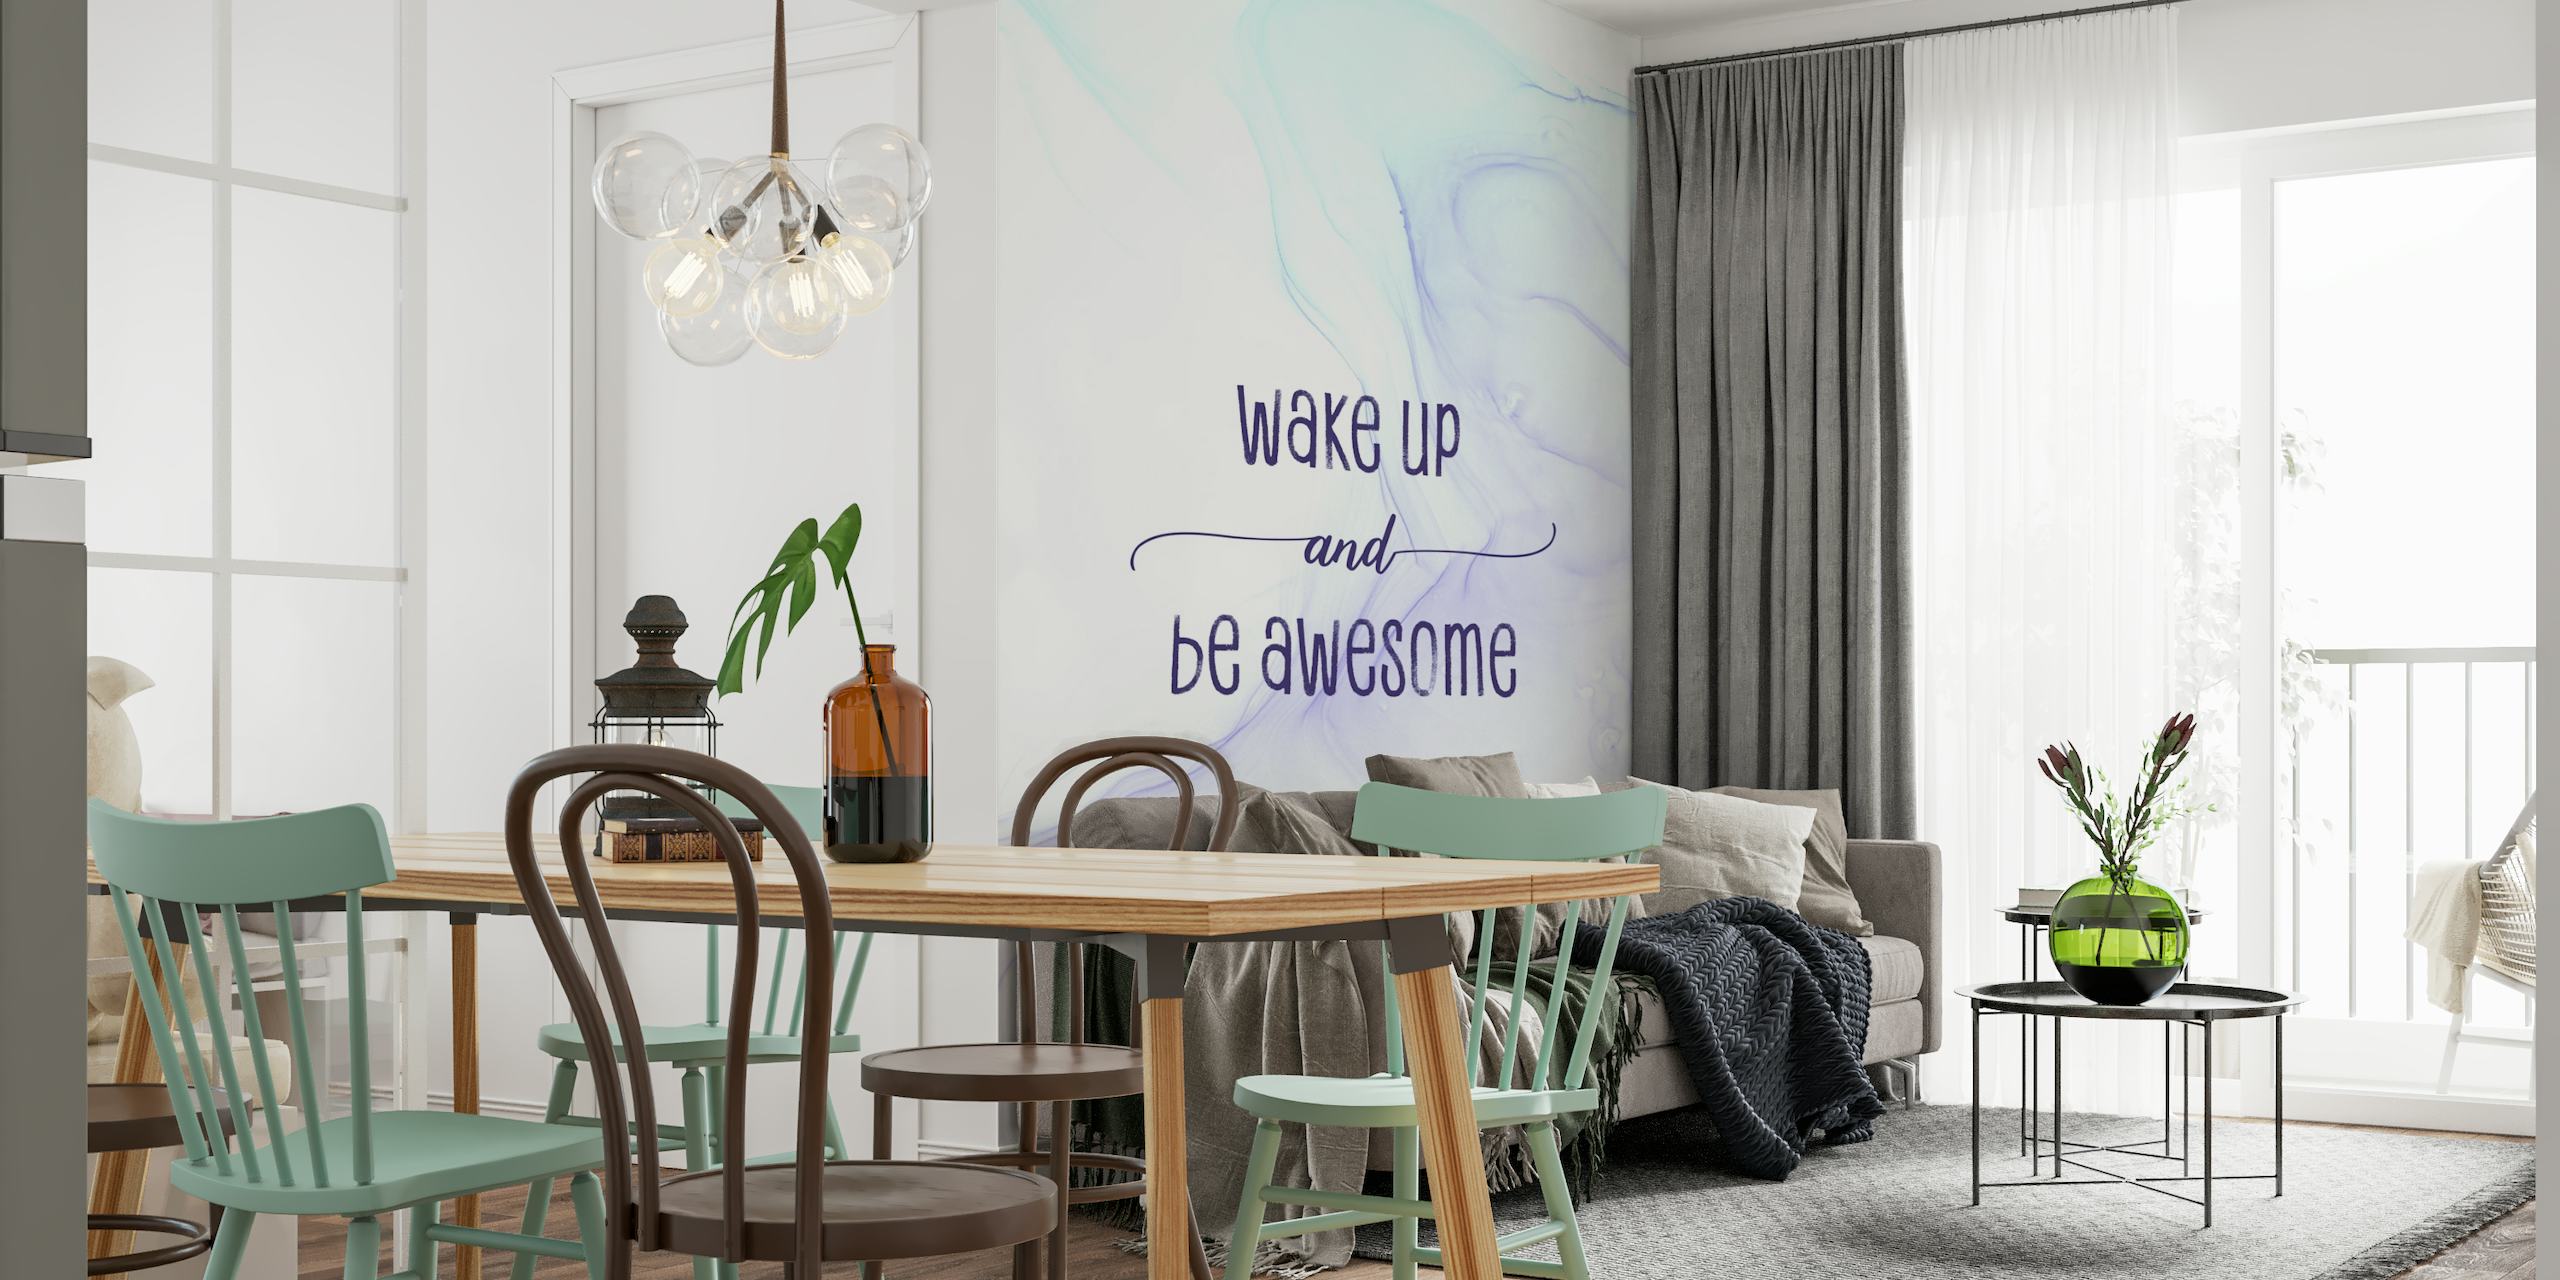 Wake up and be awesome papel pintado